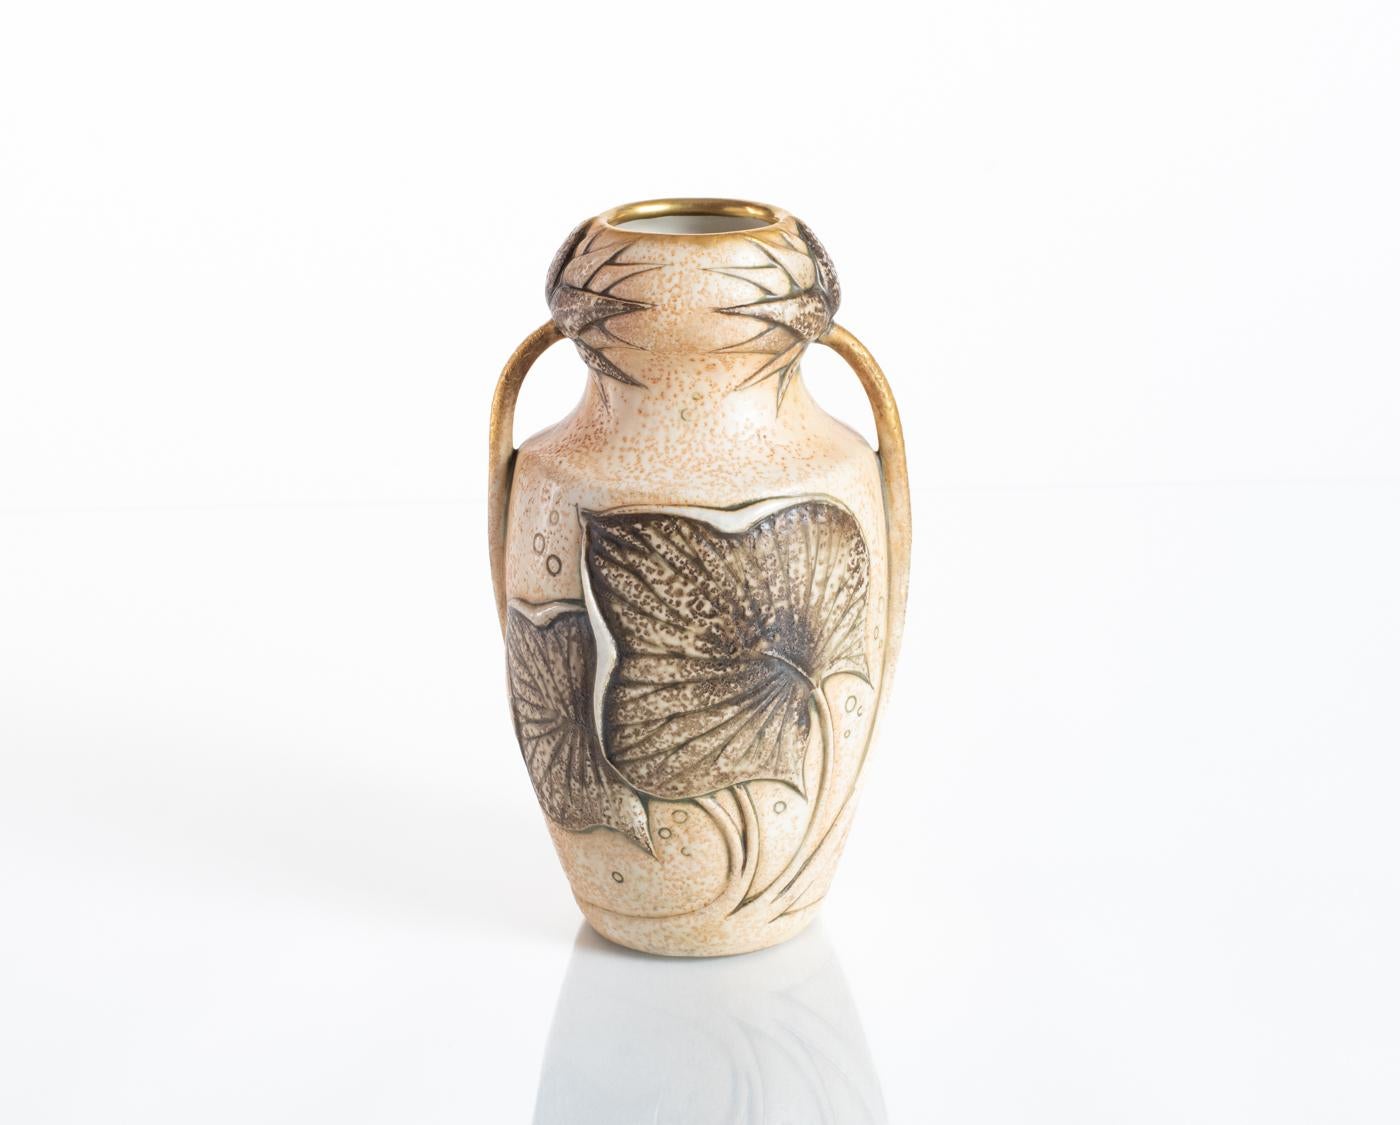 Earthy, textured water lily leaf vase with gilted, figural stem arms which encircle the golden mouth of the piece with their flowers. Stamped Ernst Wahliss and numbered in the base. This design is attributed to Paul Dachsel. 

Already well